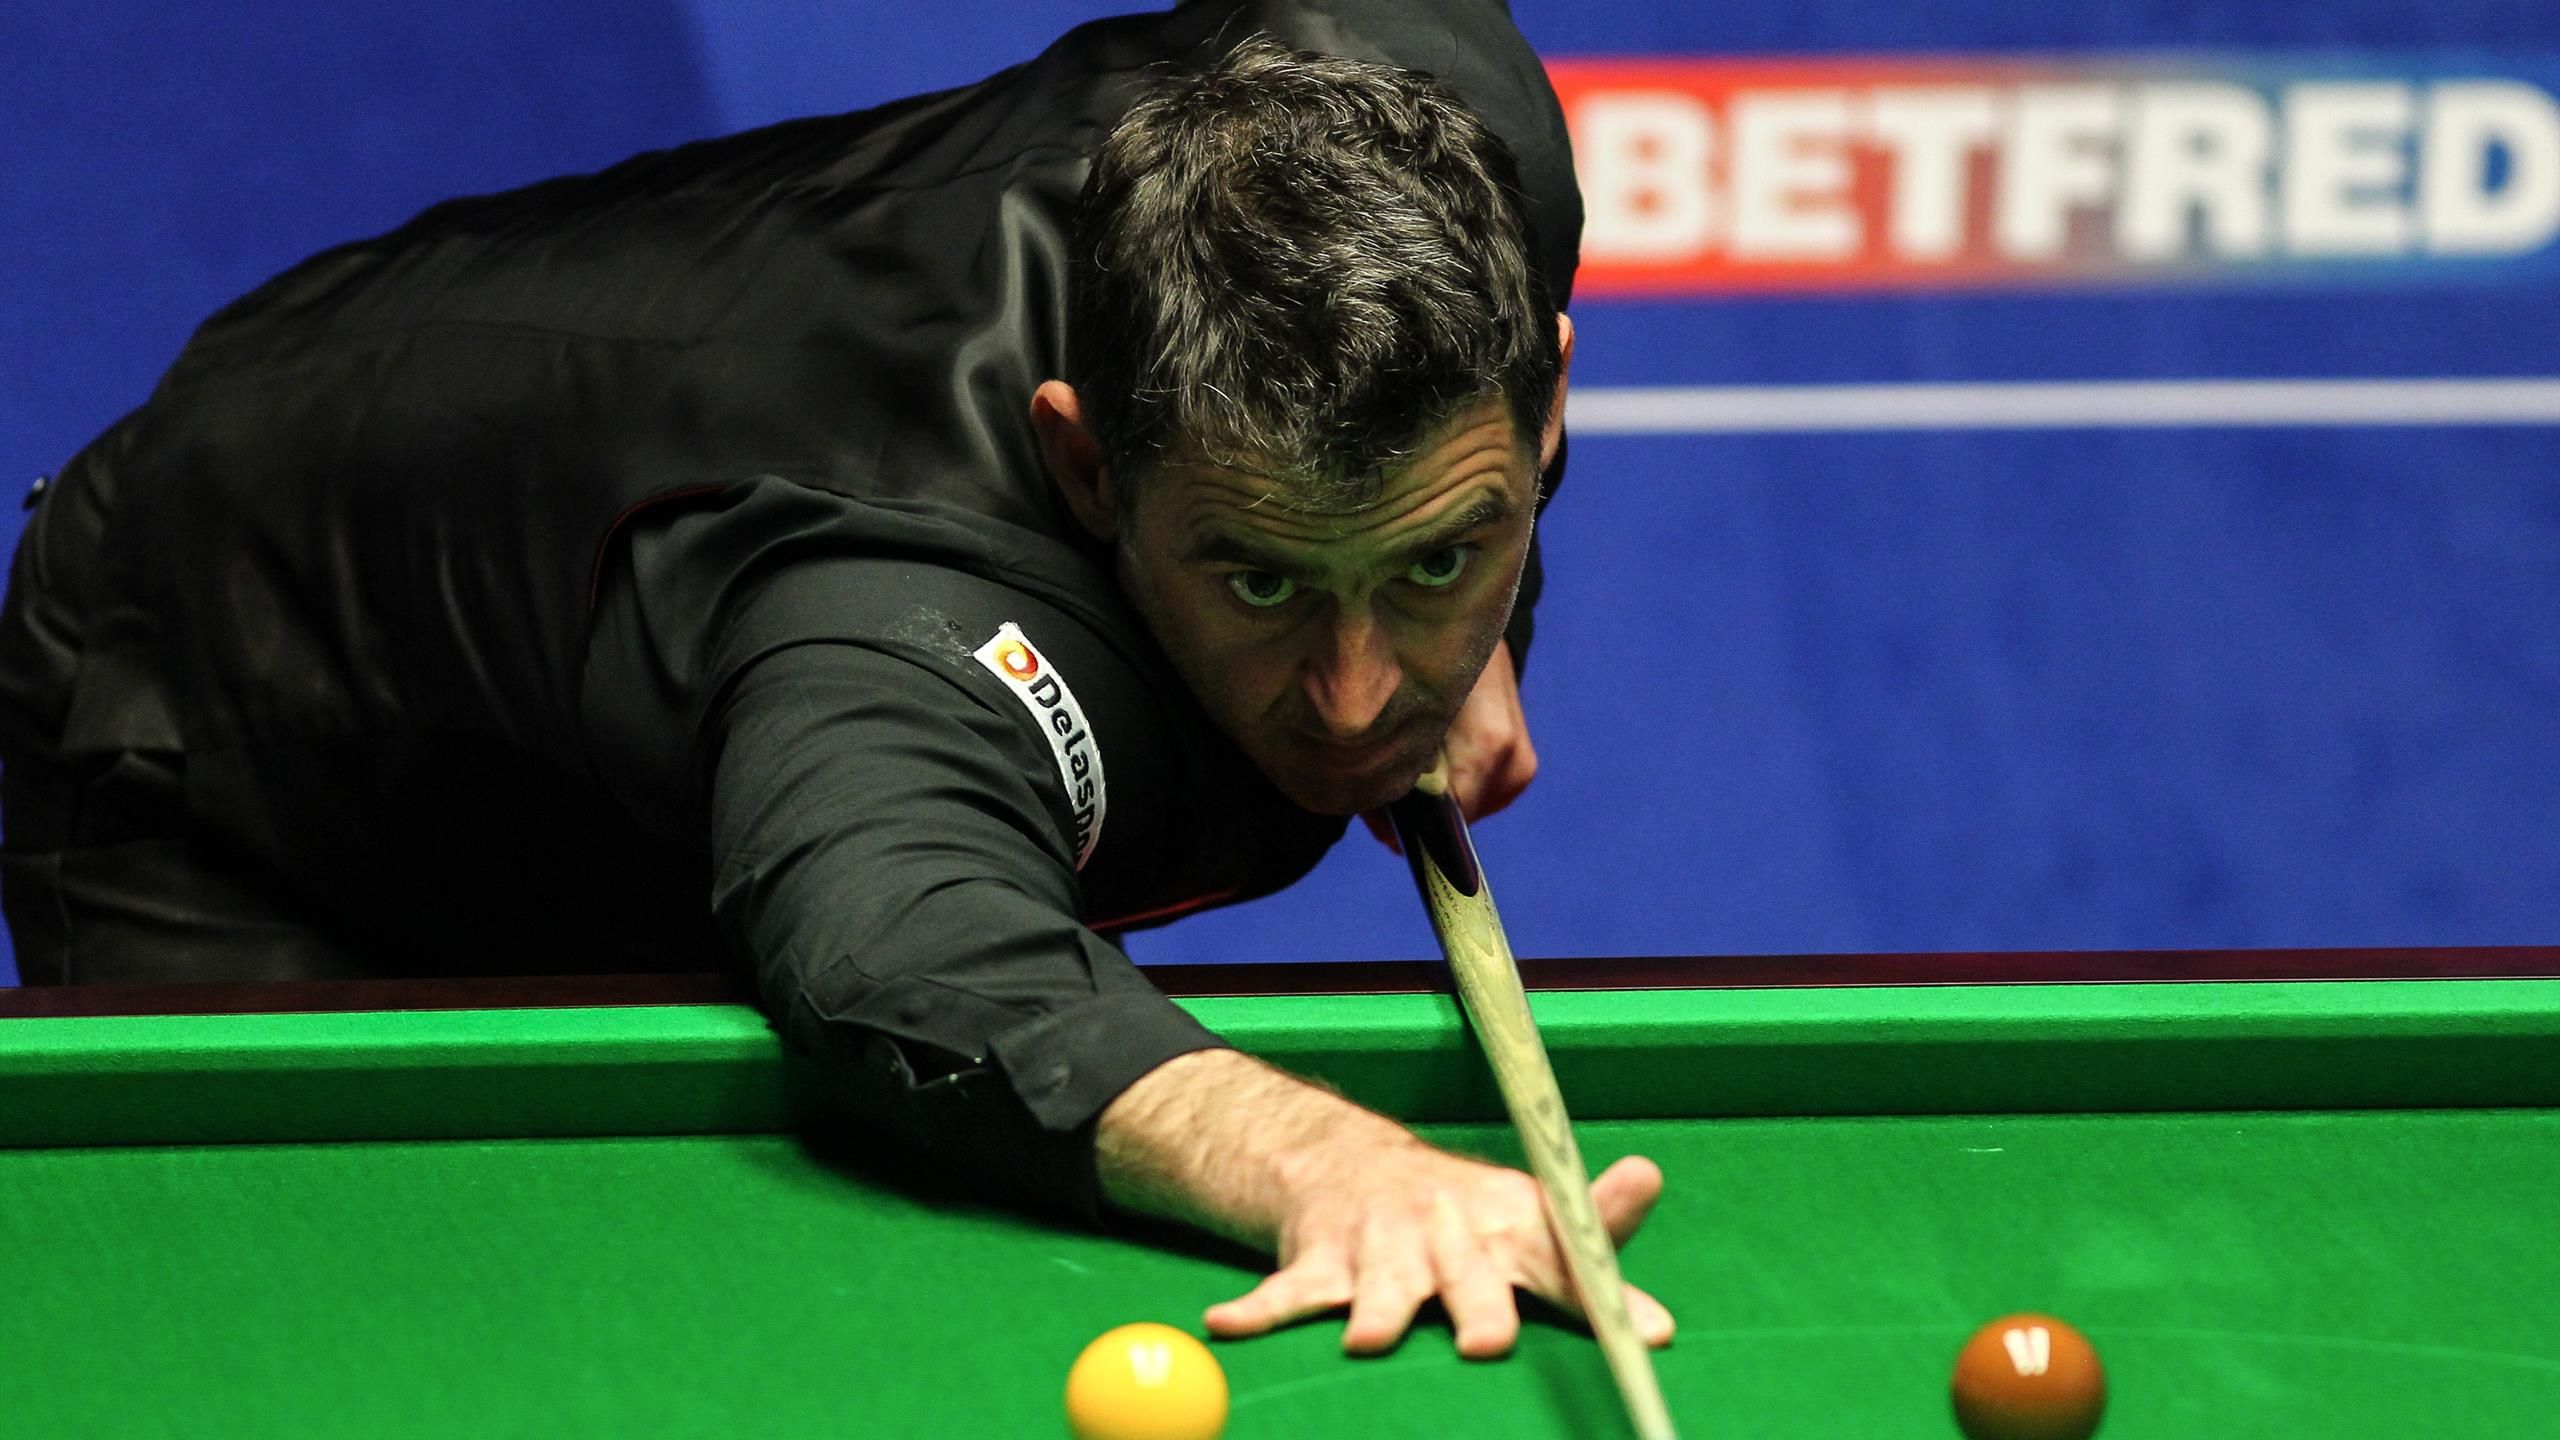 Full 2022/23 snooker season calendar ahead of World Mixed Doubles and British Open